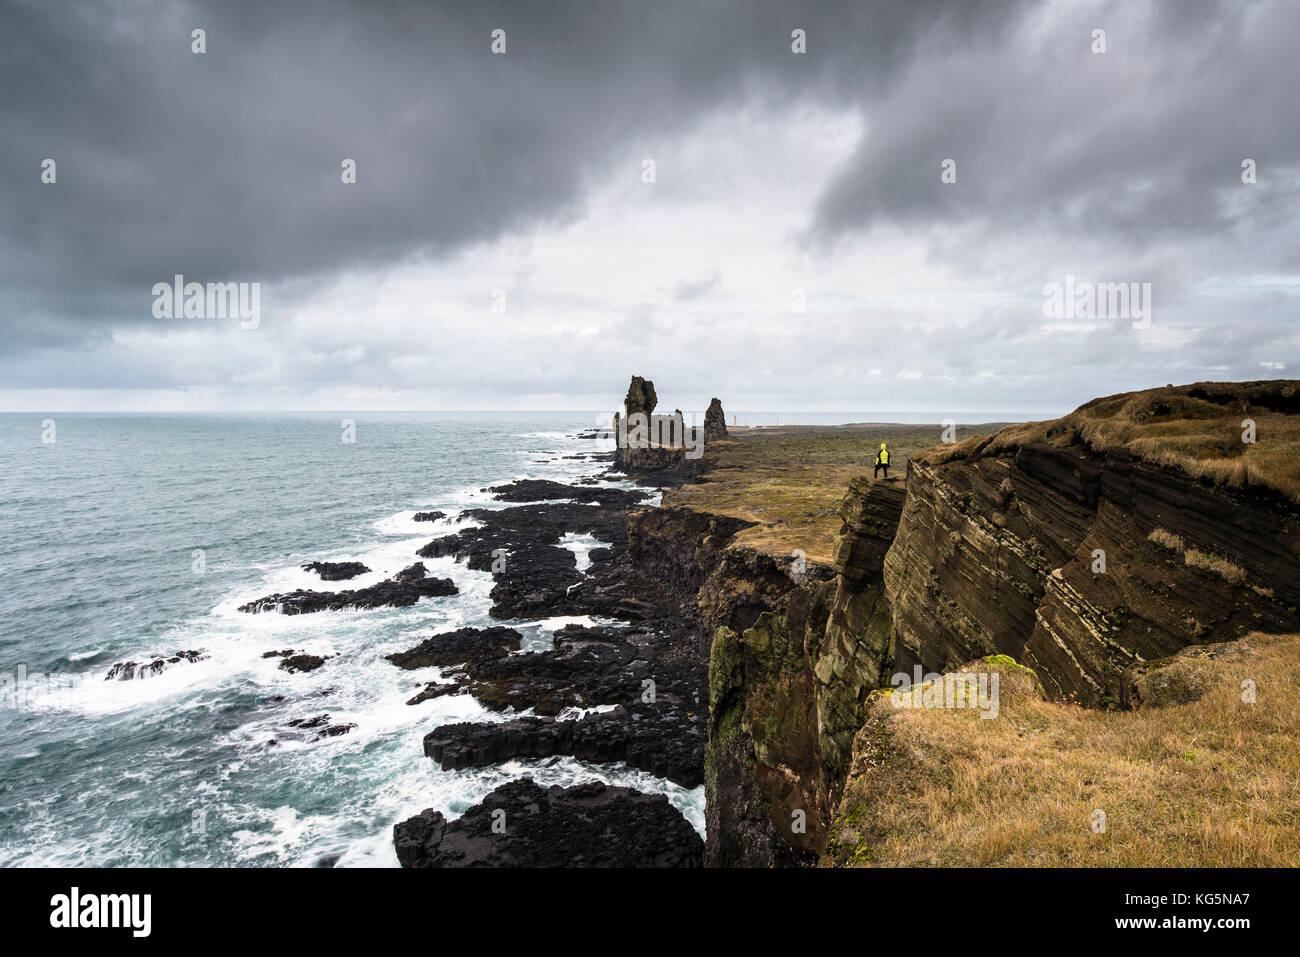 Snaefellsnes Peninsula, Western Iceland, Iceland. Londrangar sea stack and coastal cliffs. A man is standing on the cliff Stock Photo